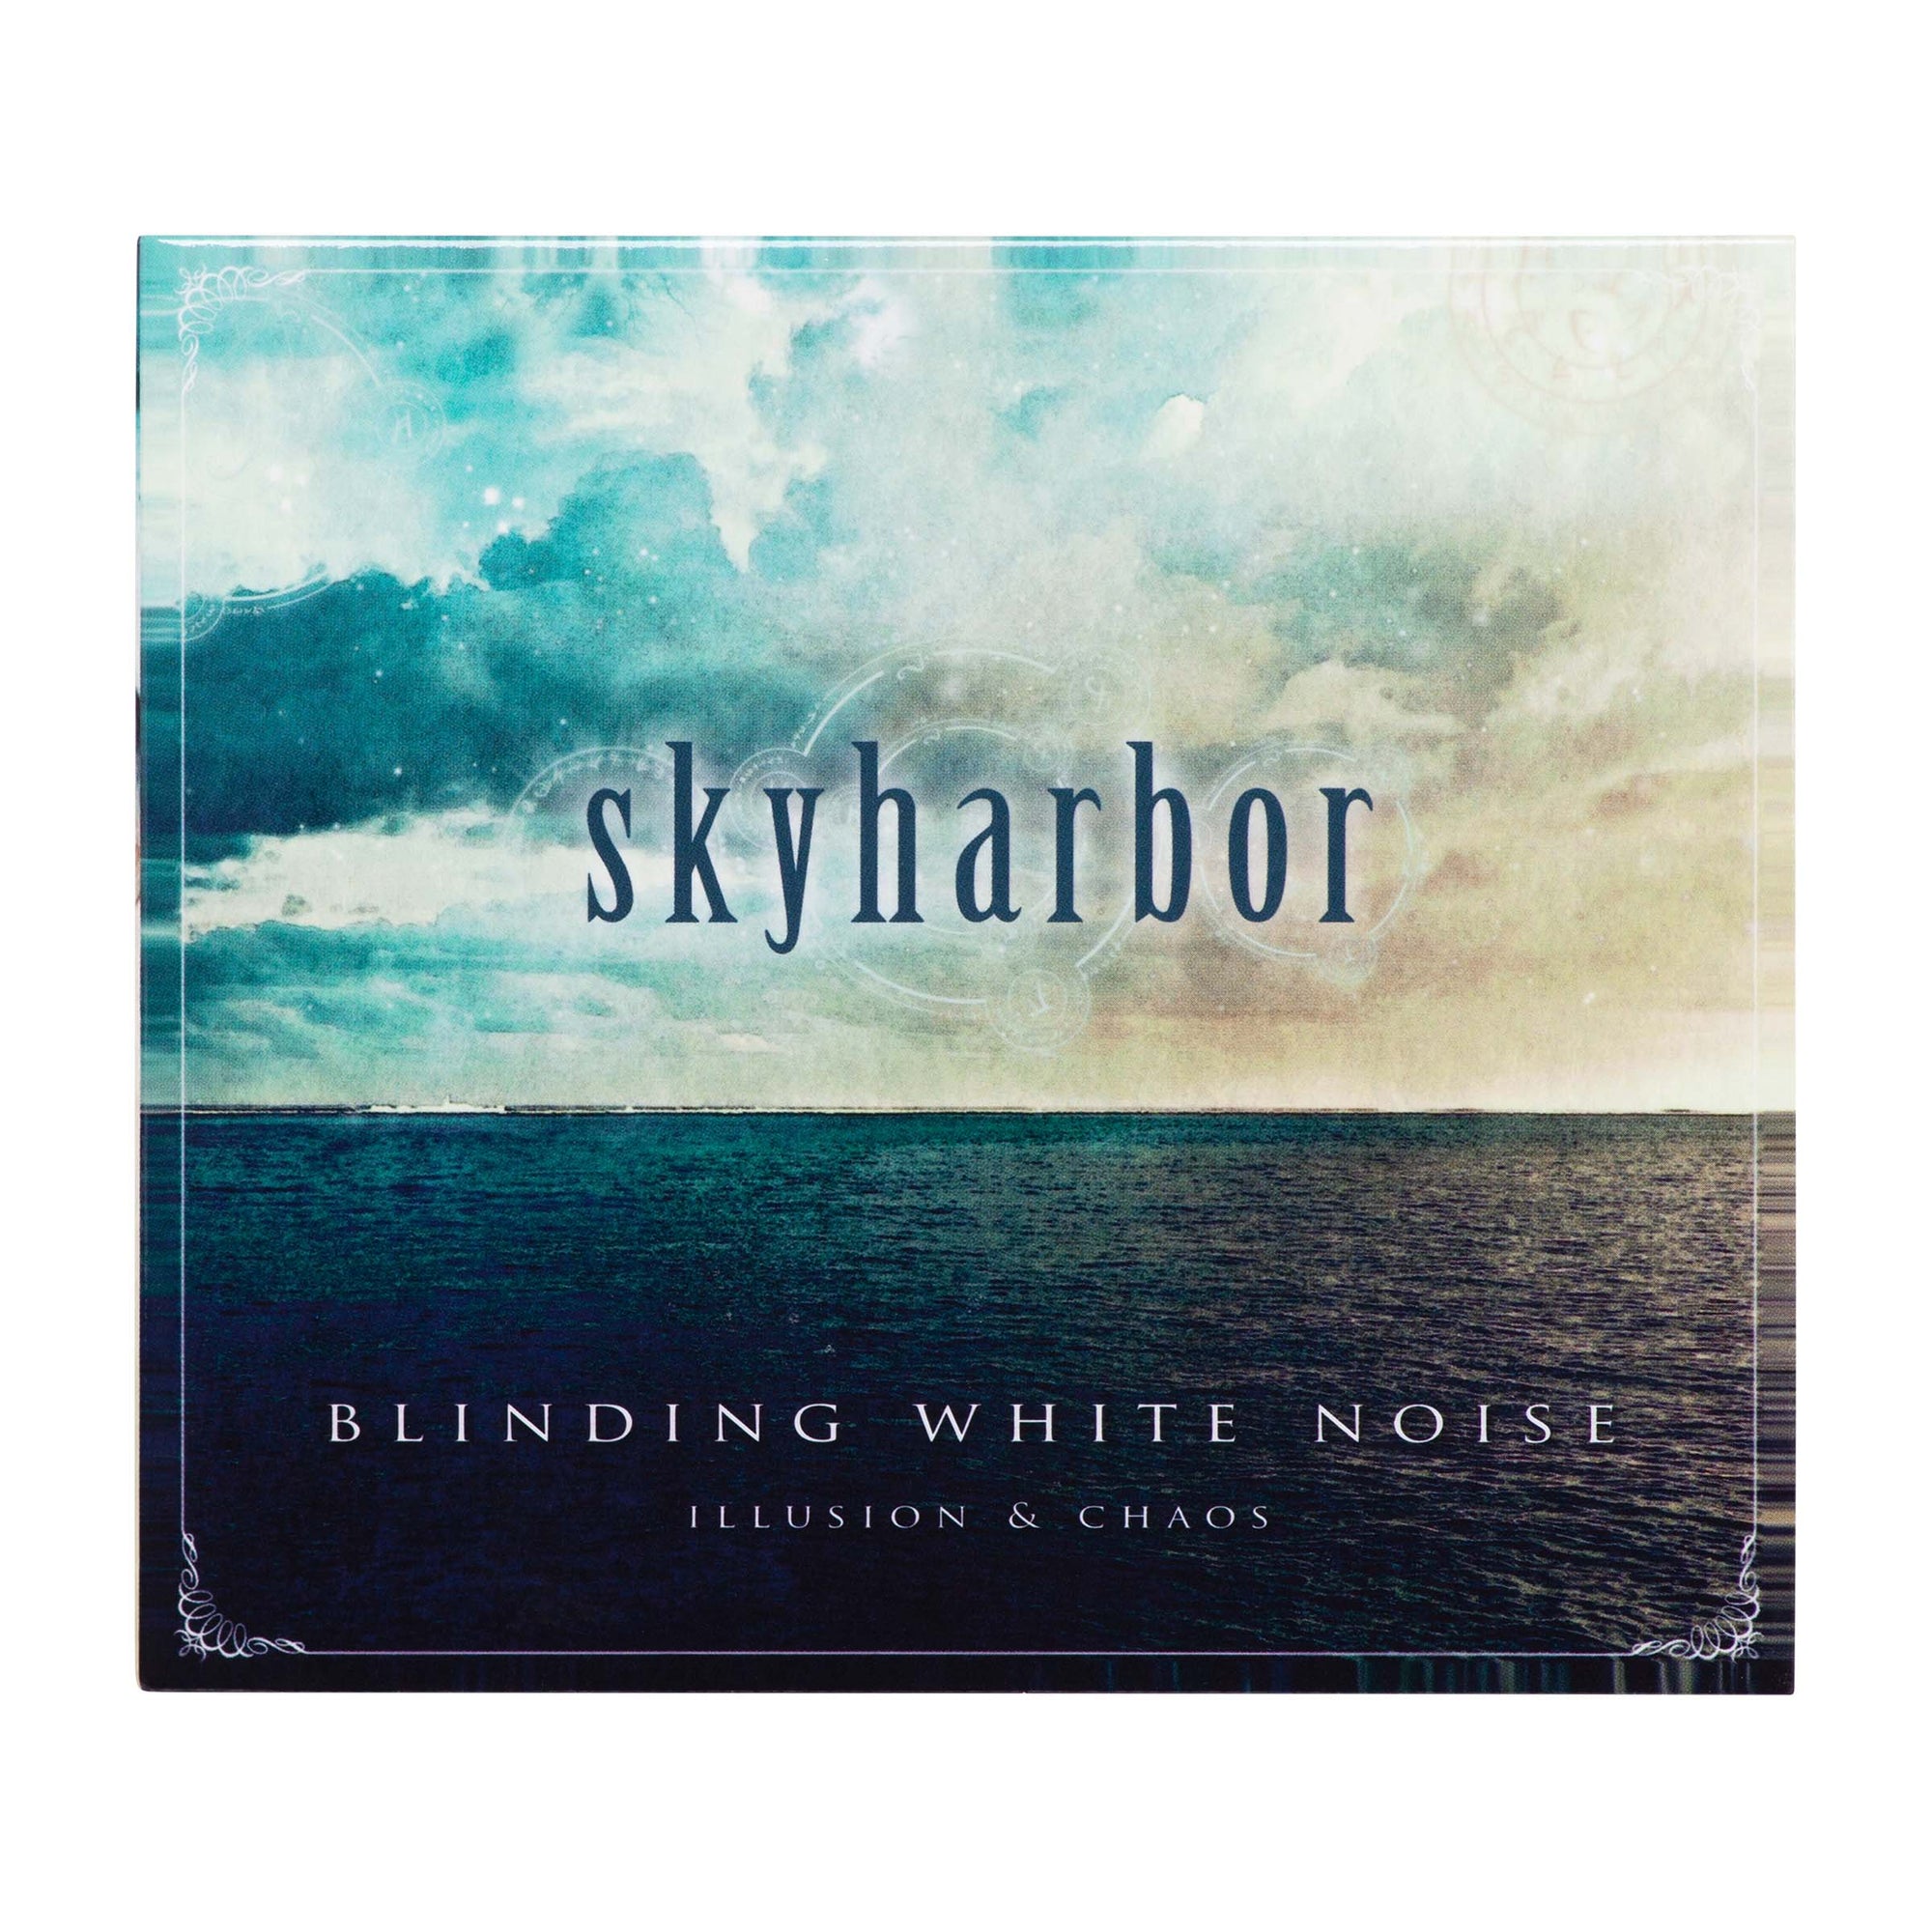 SKYHARBOR // BLINDING WHITE NOISE: ILLUSION & CHAOS - CD - Wild Thing Records